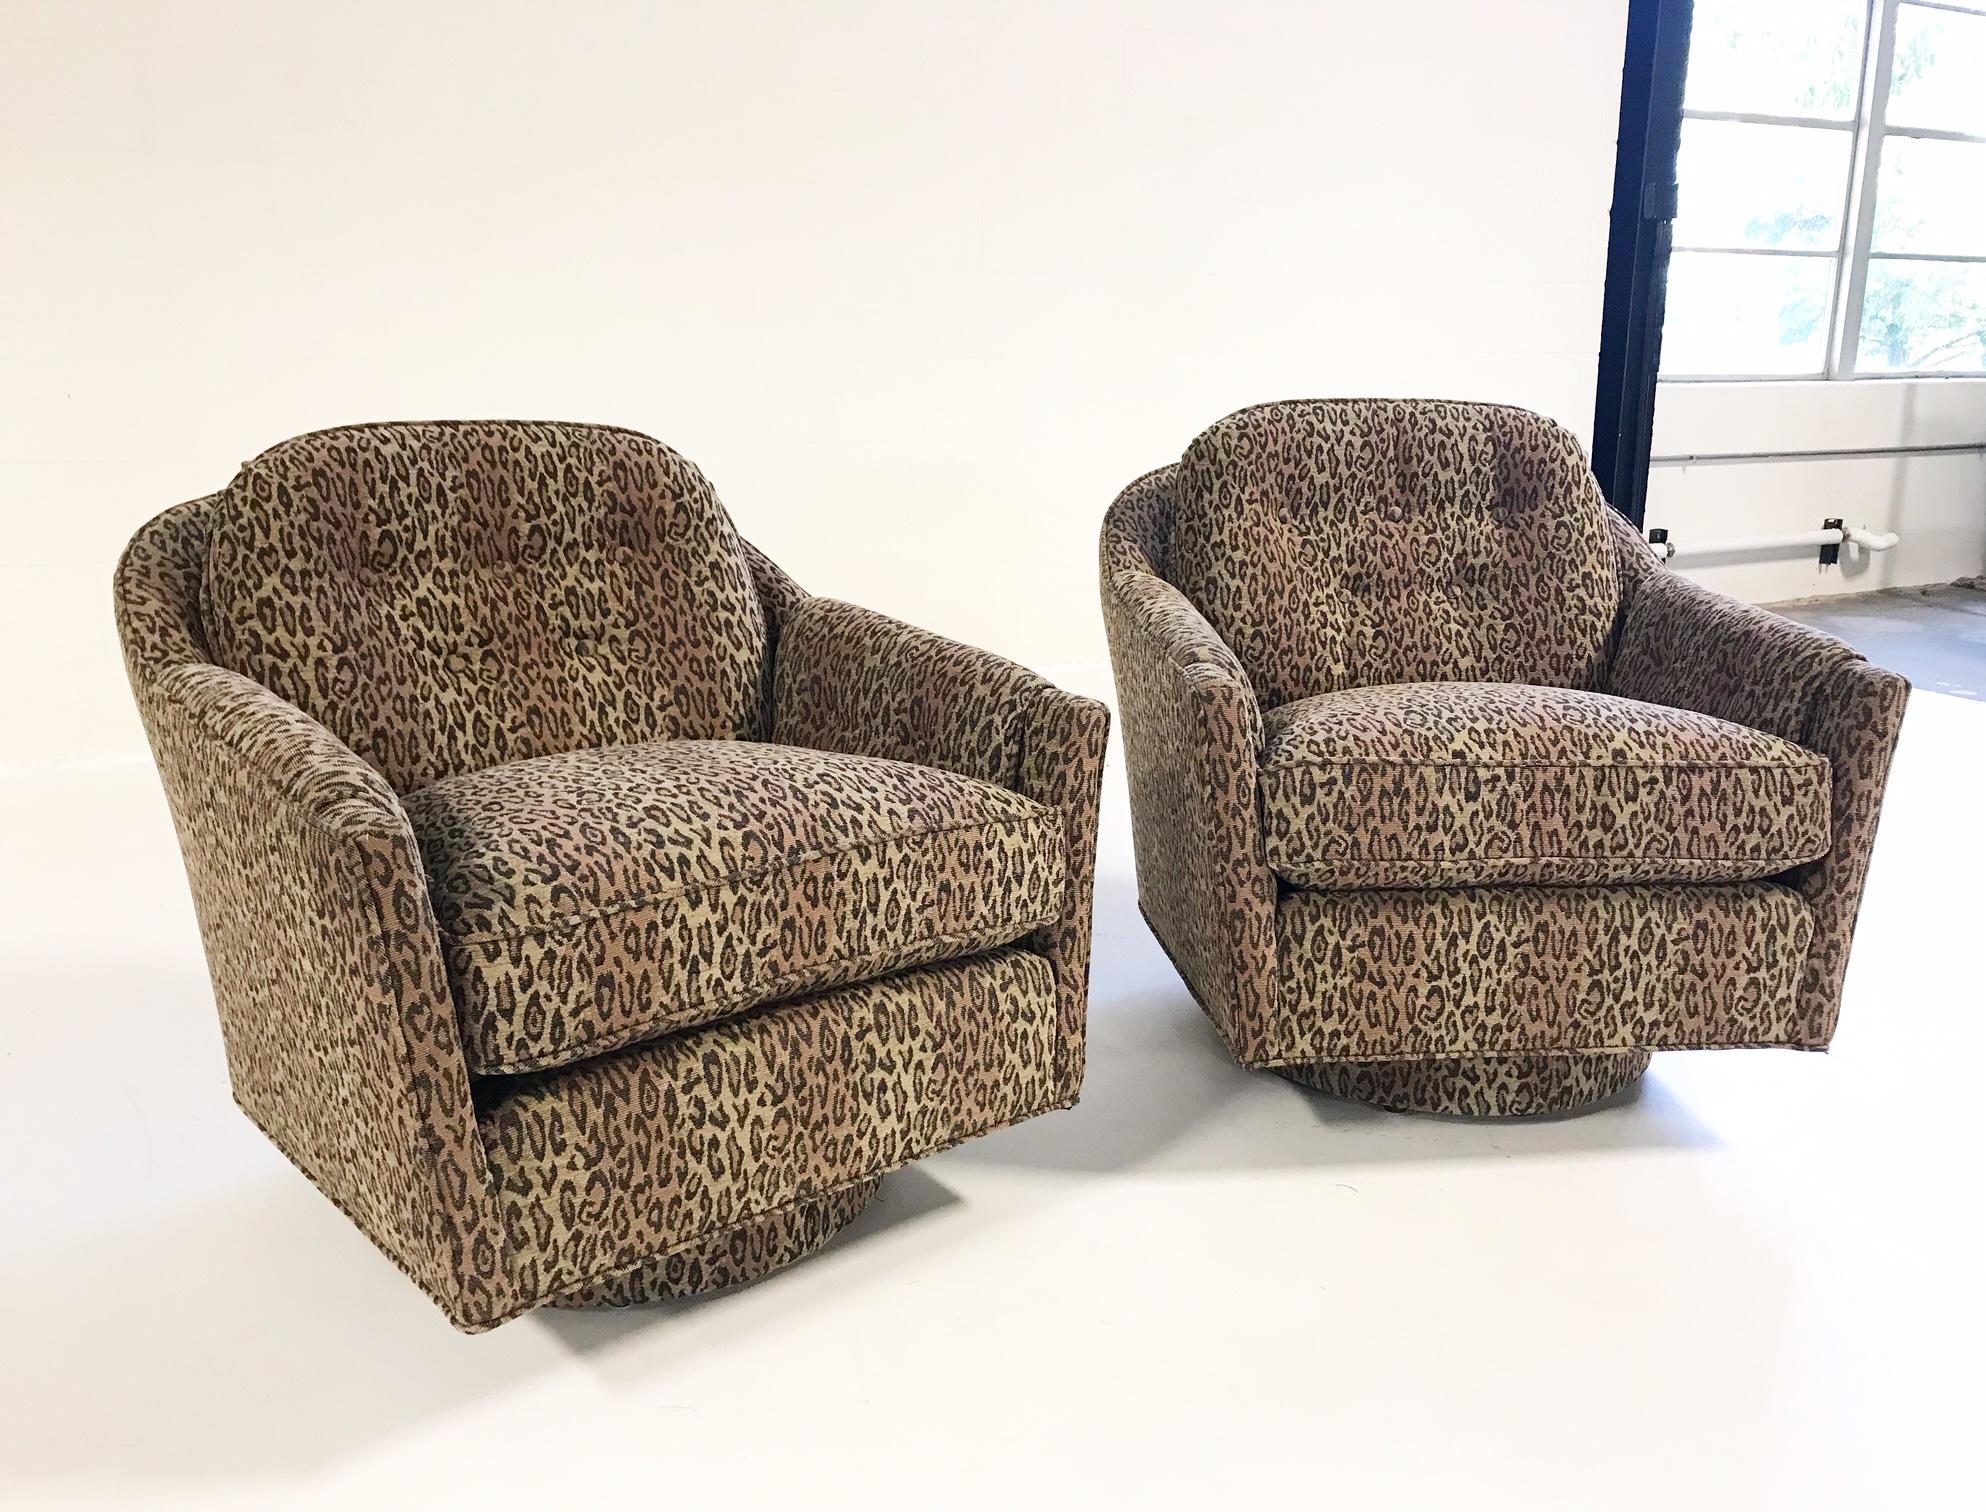 20th Century Swivel Lounge Chairs in the style of Milo Baughman, in Kravet Leopard Print For Sale